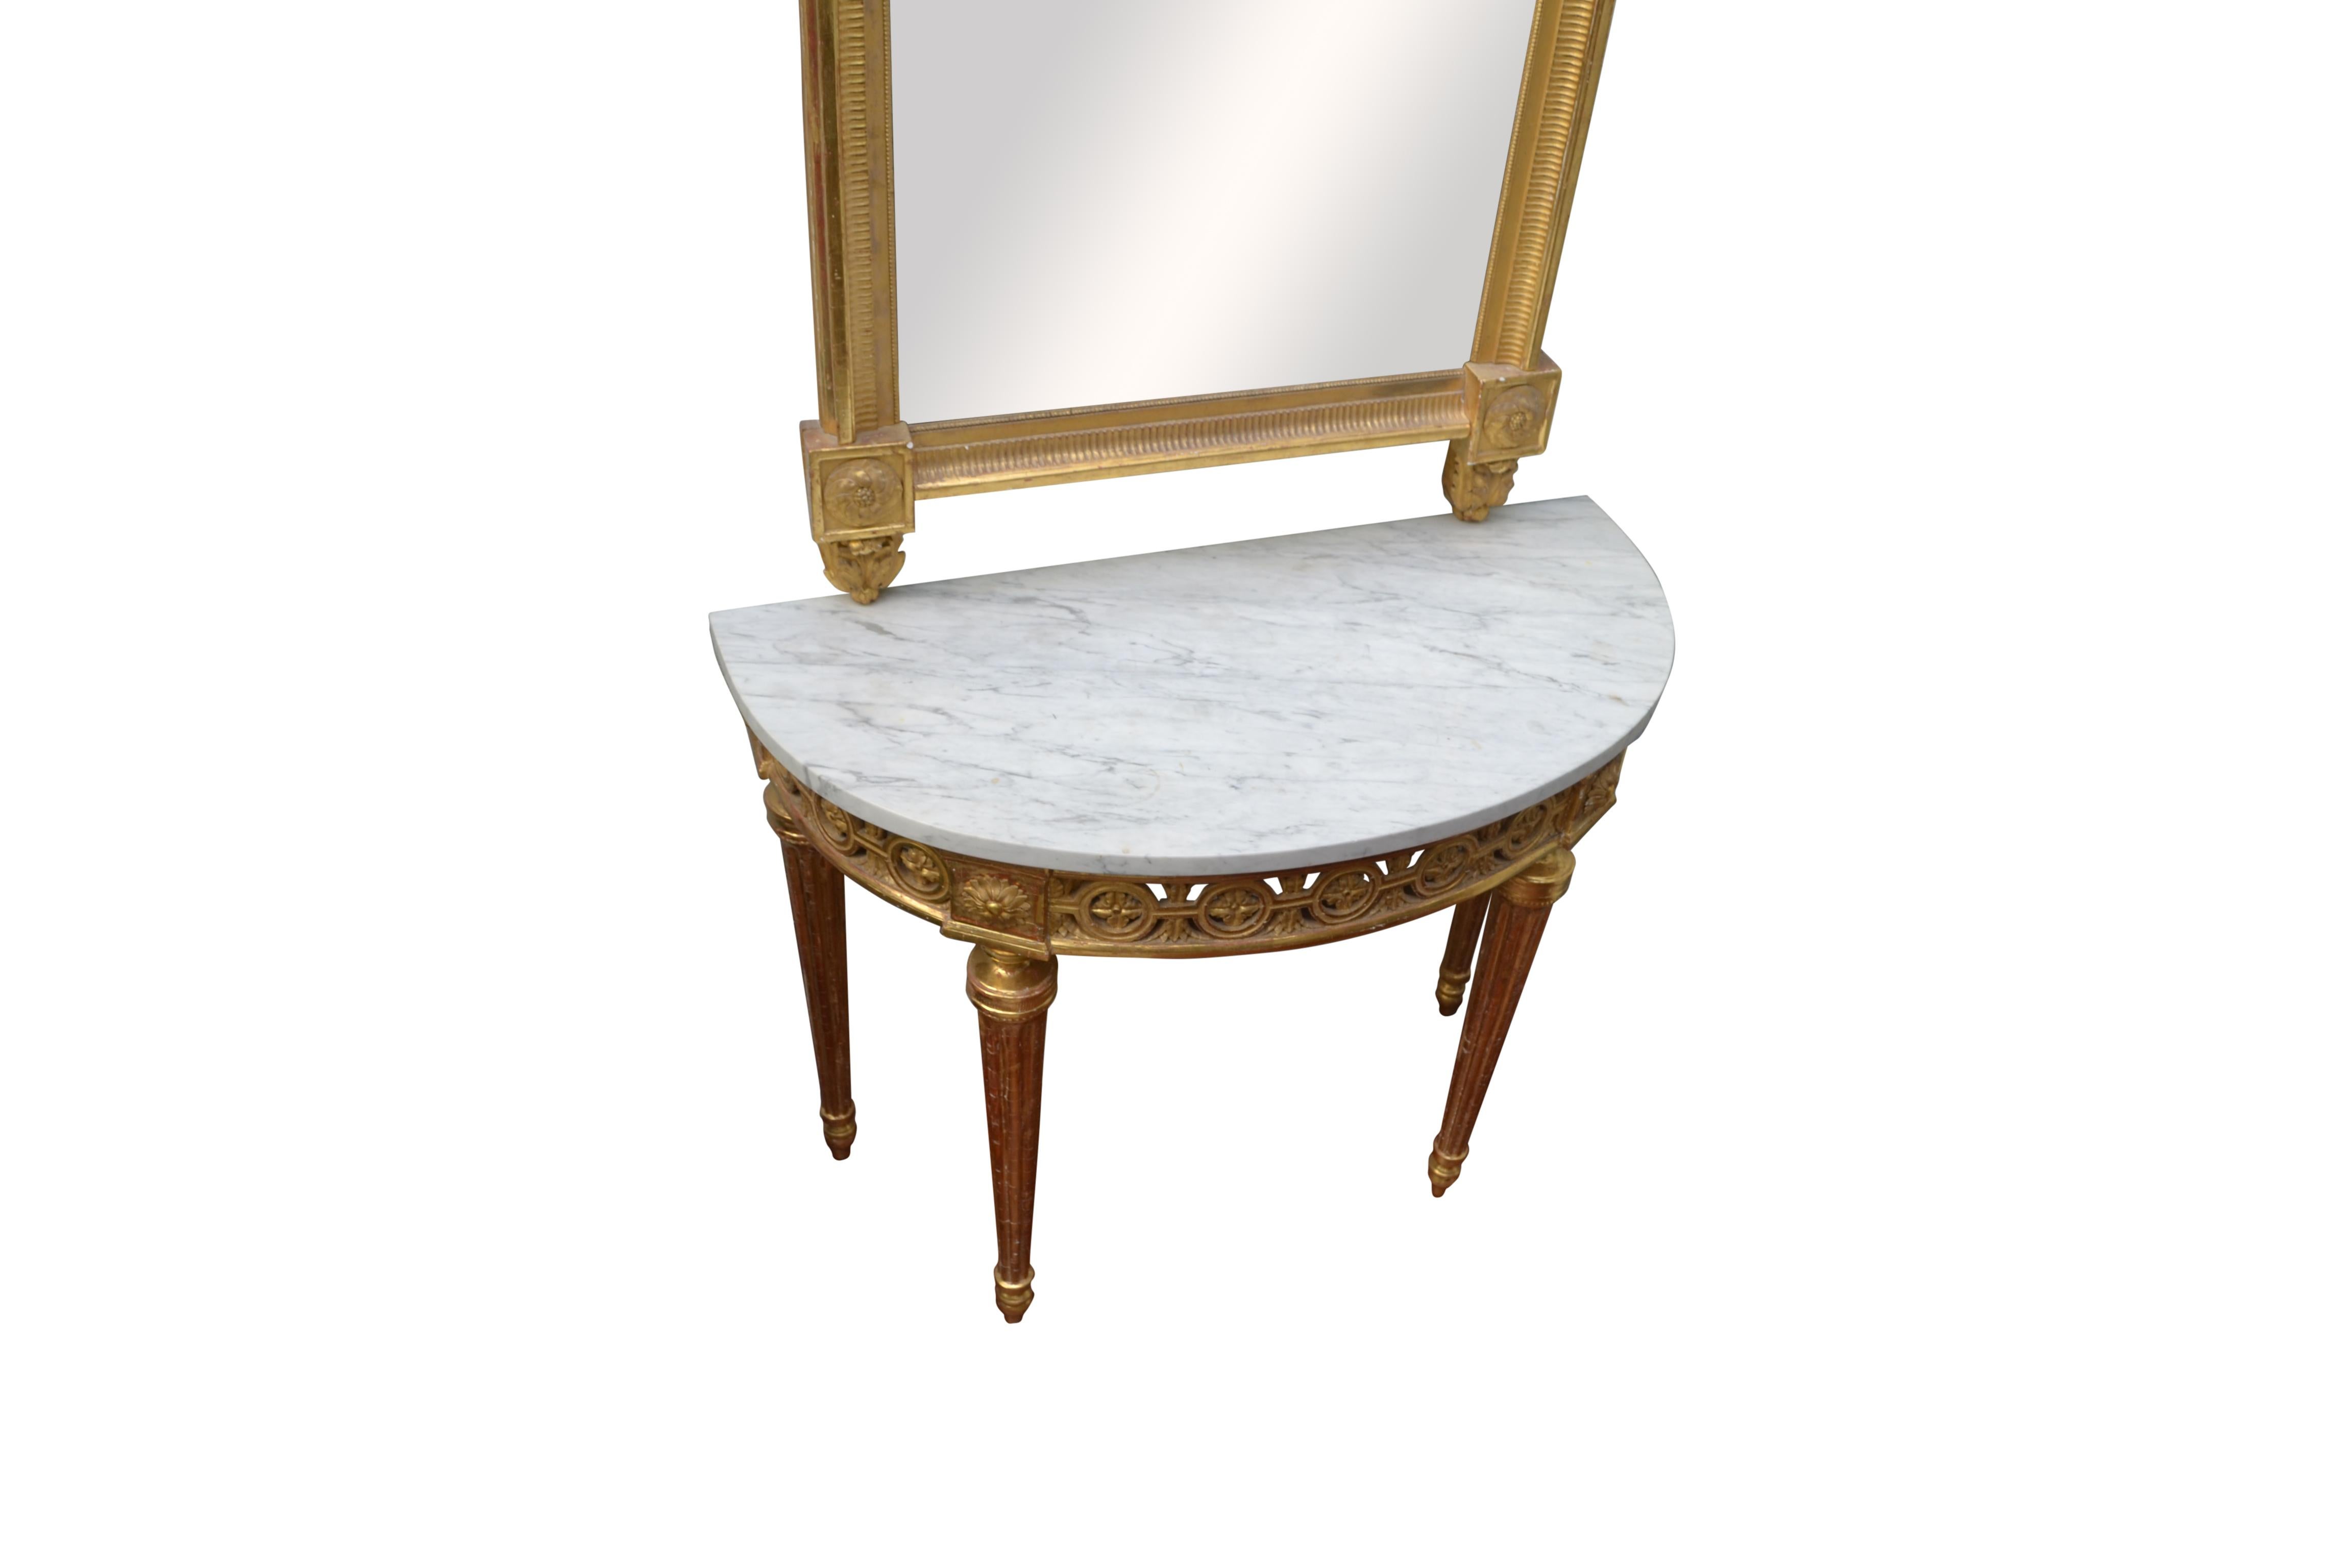 Late 18th Century Italian Giltwood Mirror and Demilune Console For Sale 3